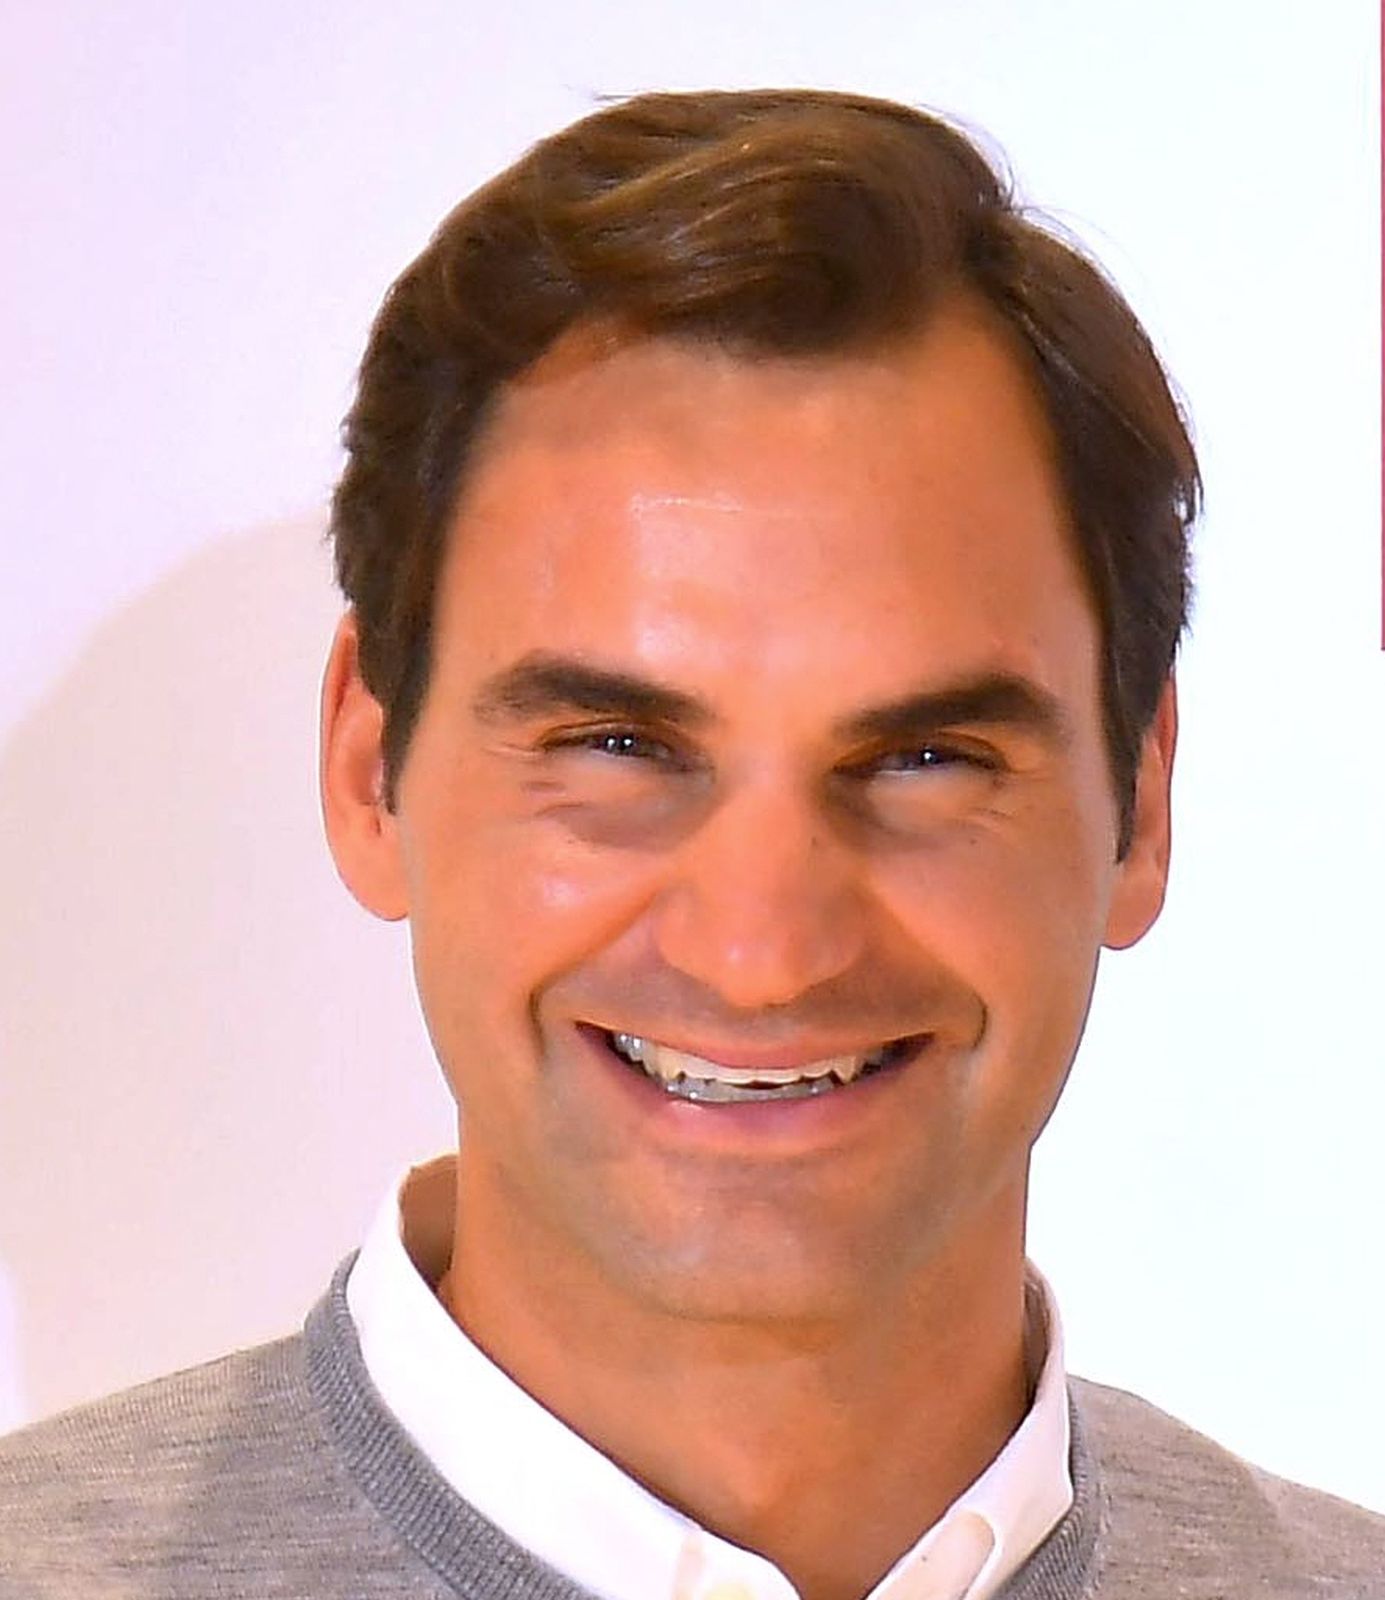 Uniqlo to Support Roger Federer’s Charitable Projects in Southern Africa